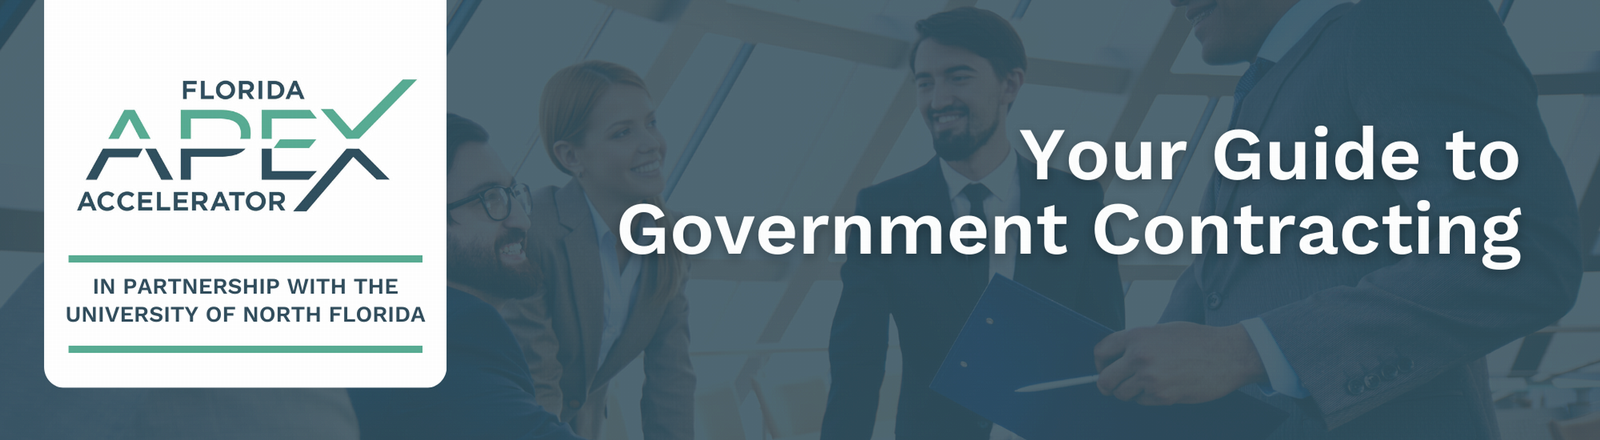 Florida APEX logo - Your Guide to Government Contracting